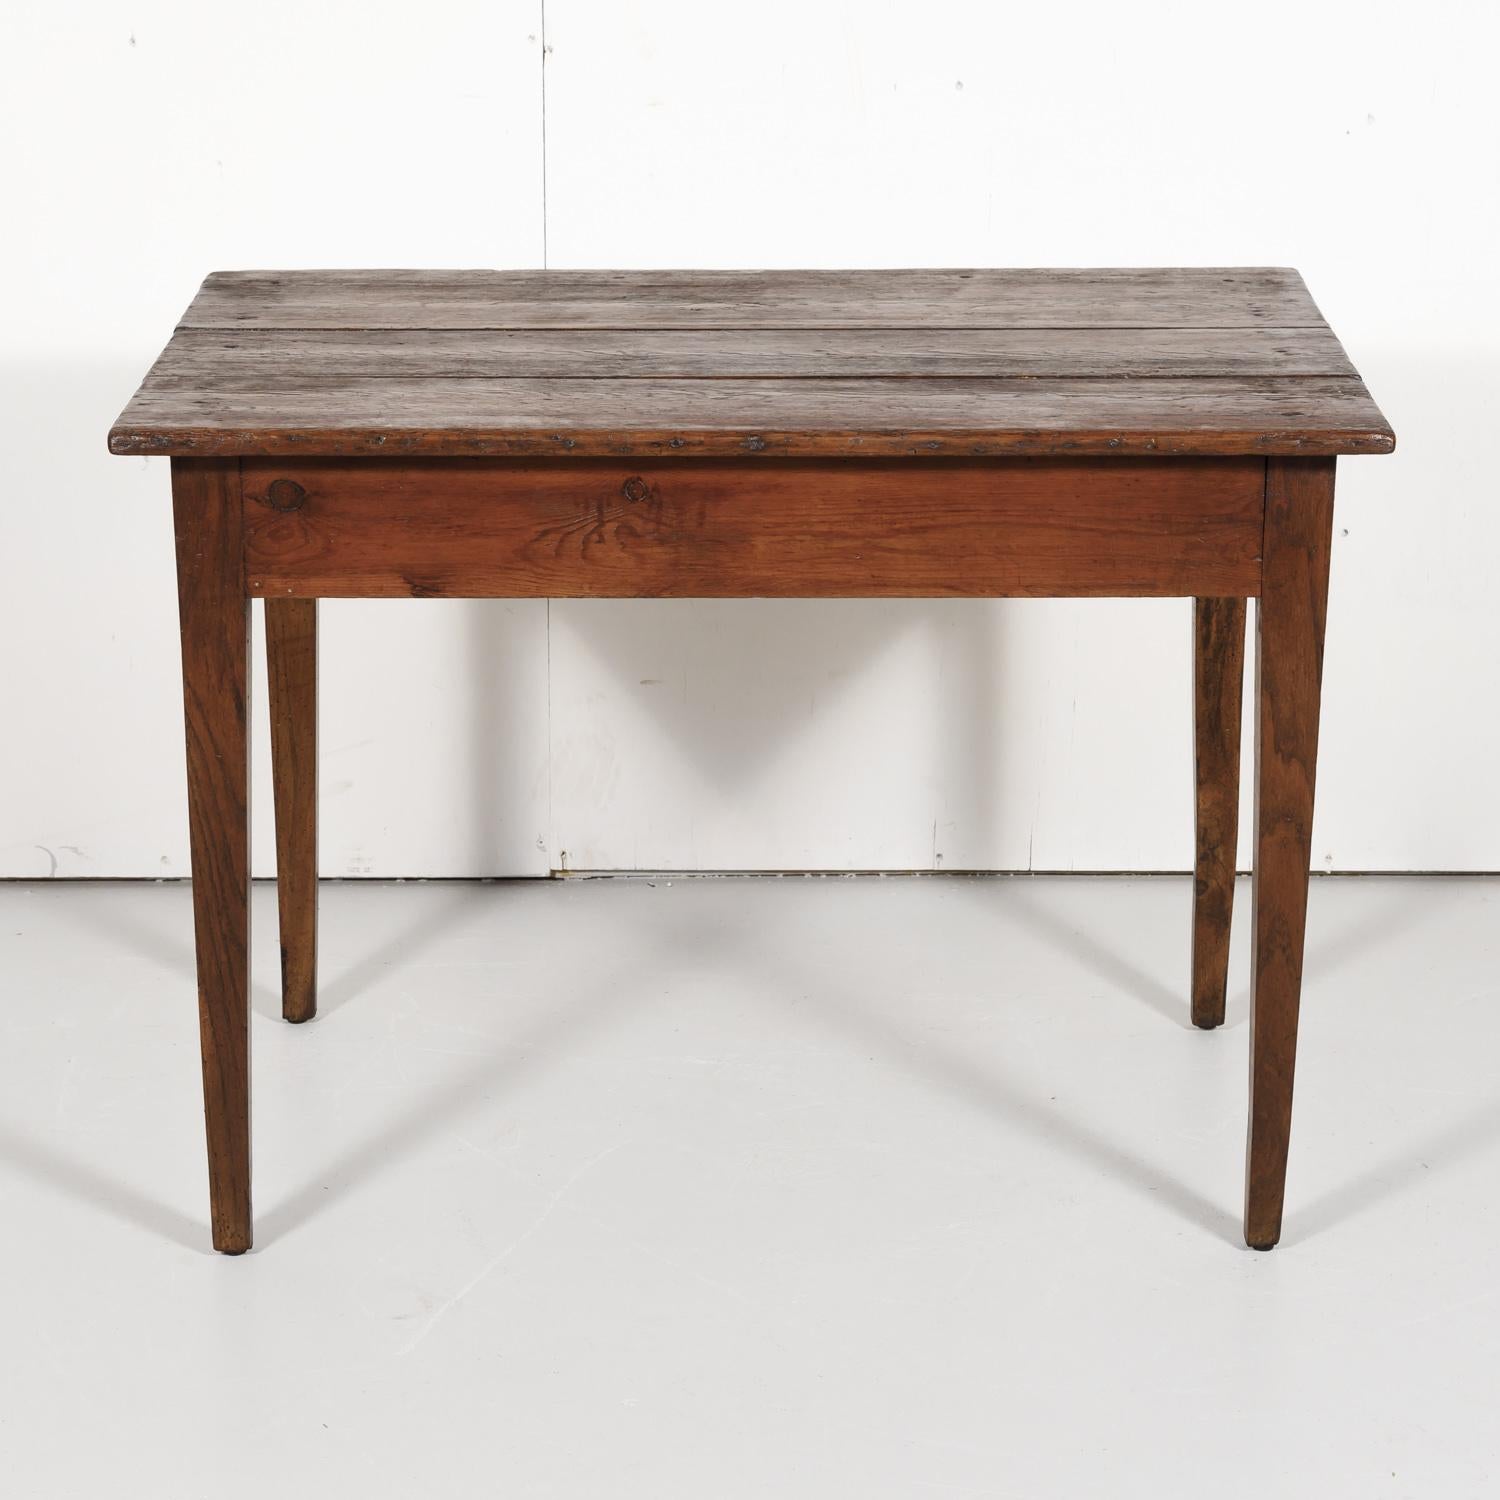 Early 19th Century Primitive French Country Side Table or Work Table 10